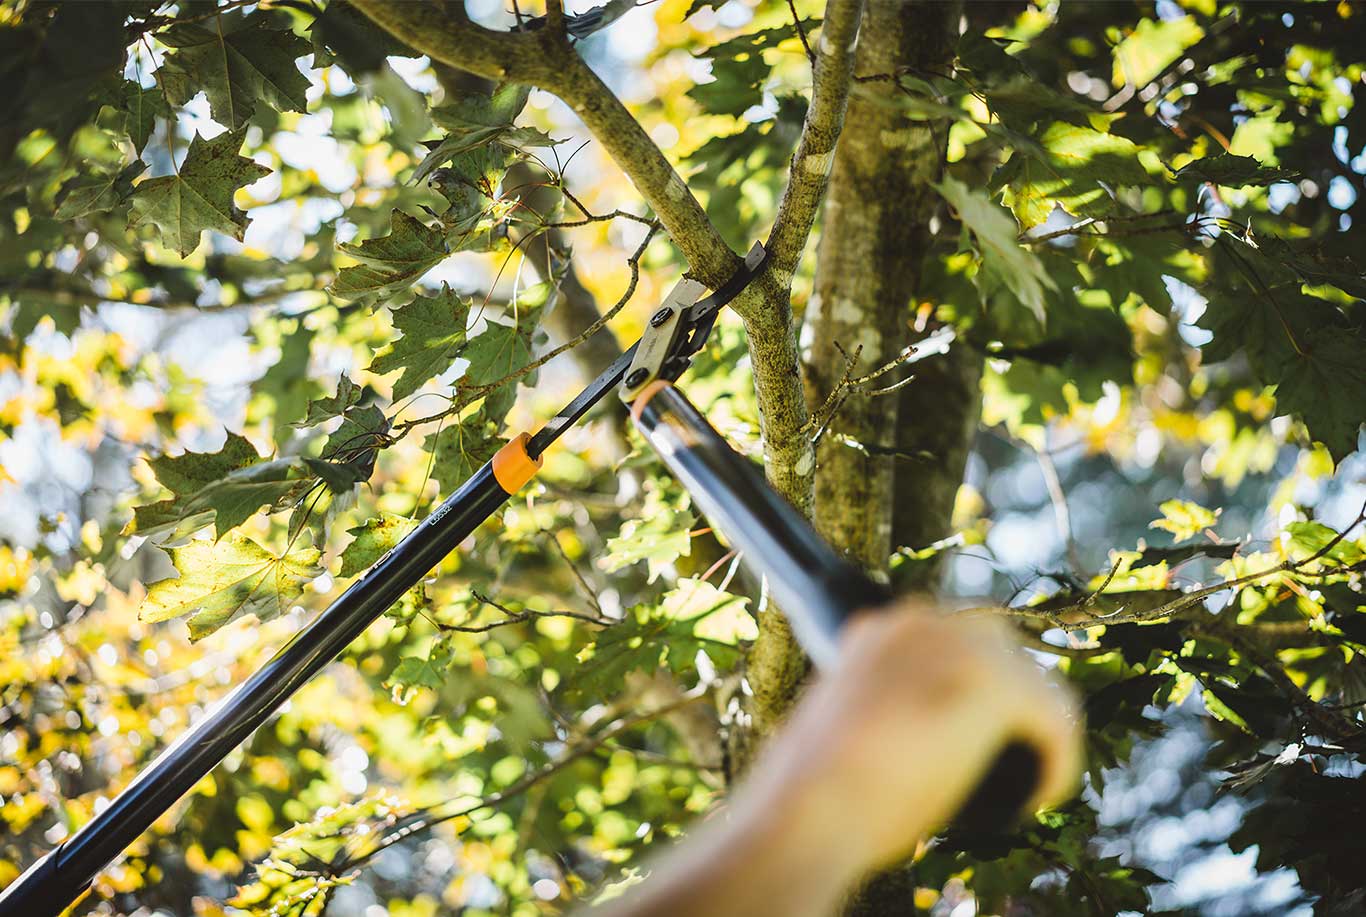 Tree Pruning-Greenacres Tree Trimming and Tree Removal Services-We Offer Tree Trimming Services, Tree Removal, Tree Pruning, Tree Cutting, Residential and Commercial Tree Trimming Services, Storm Damage, Emergency Tree Removal, Land Clearing, Tree Companies, Tree Care Service, Stump Grinding, and we're the Best Tree Trimming Company Near You Guaranteed!